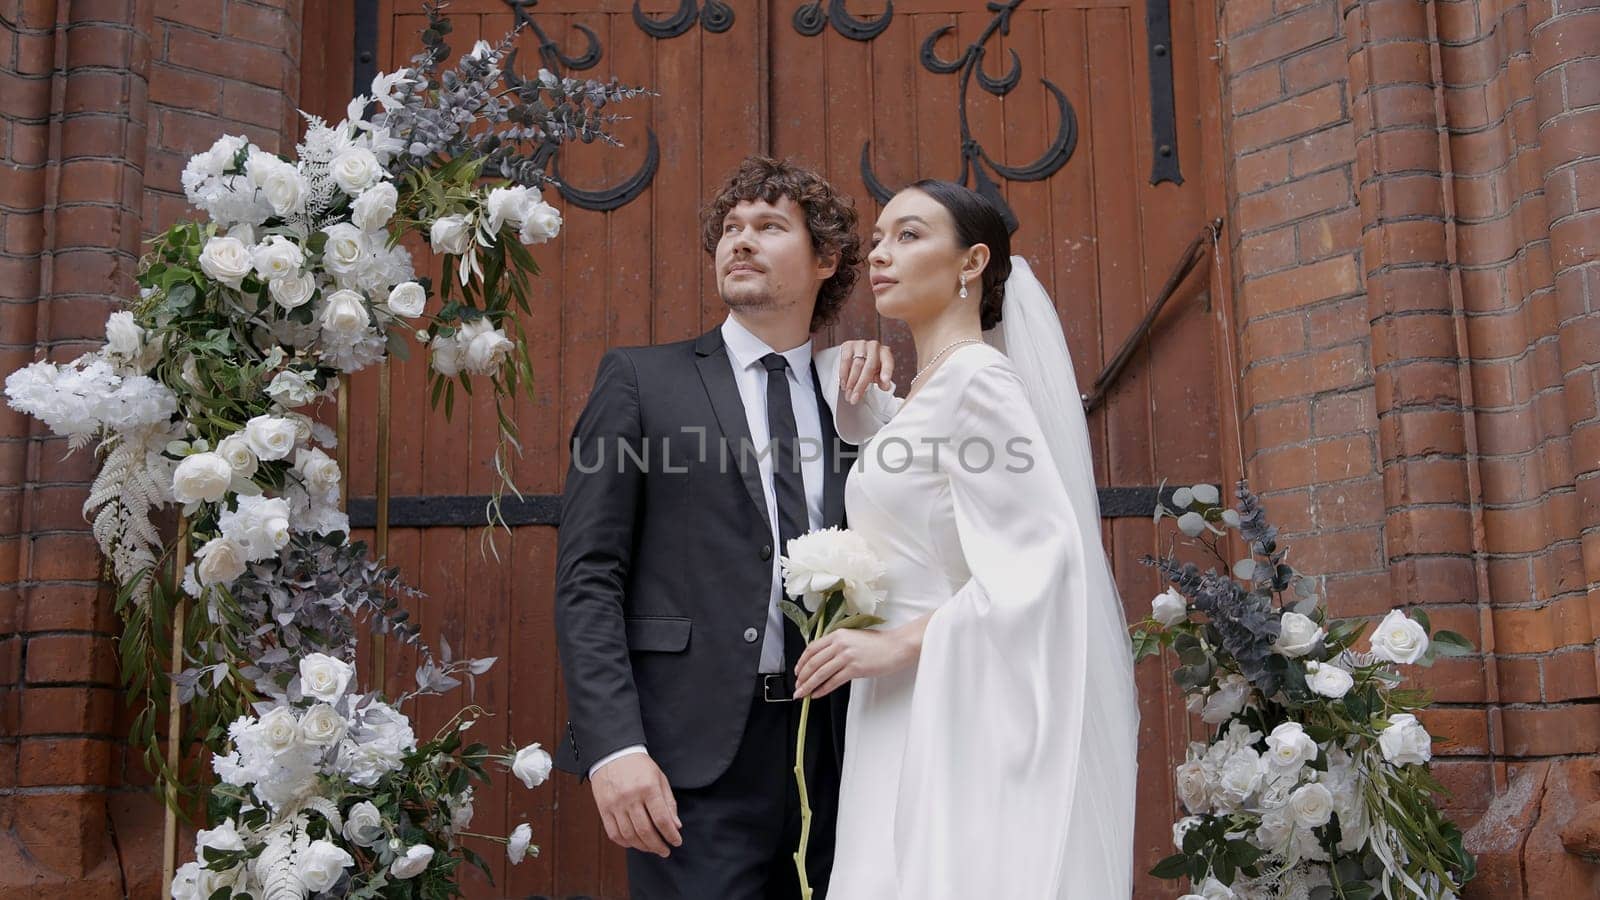 A bright and spectacular wedding couple. Action.Newlyweds where a bride in a white dress with a slit on her leg and a man with a beard in a suit walking next to a white arch with fresh flowers. High quality 4k footage